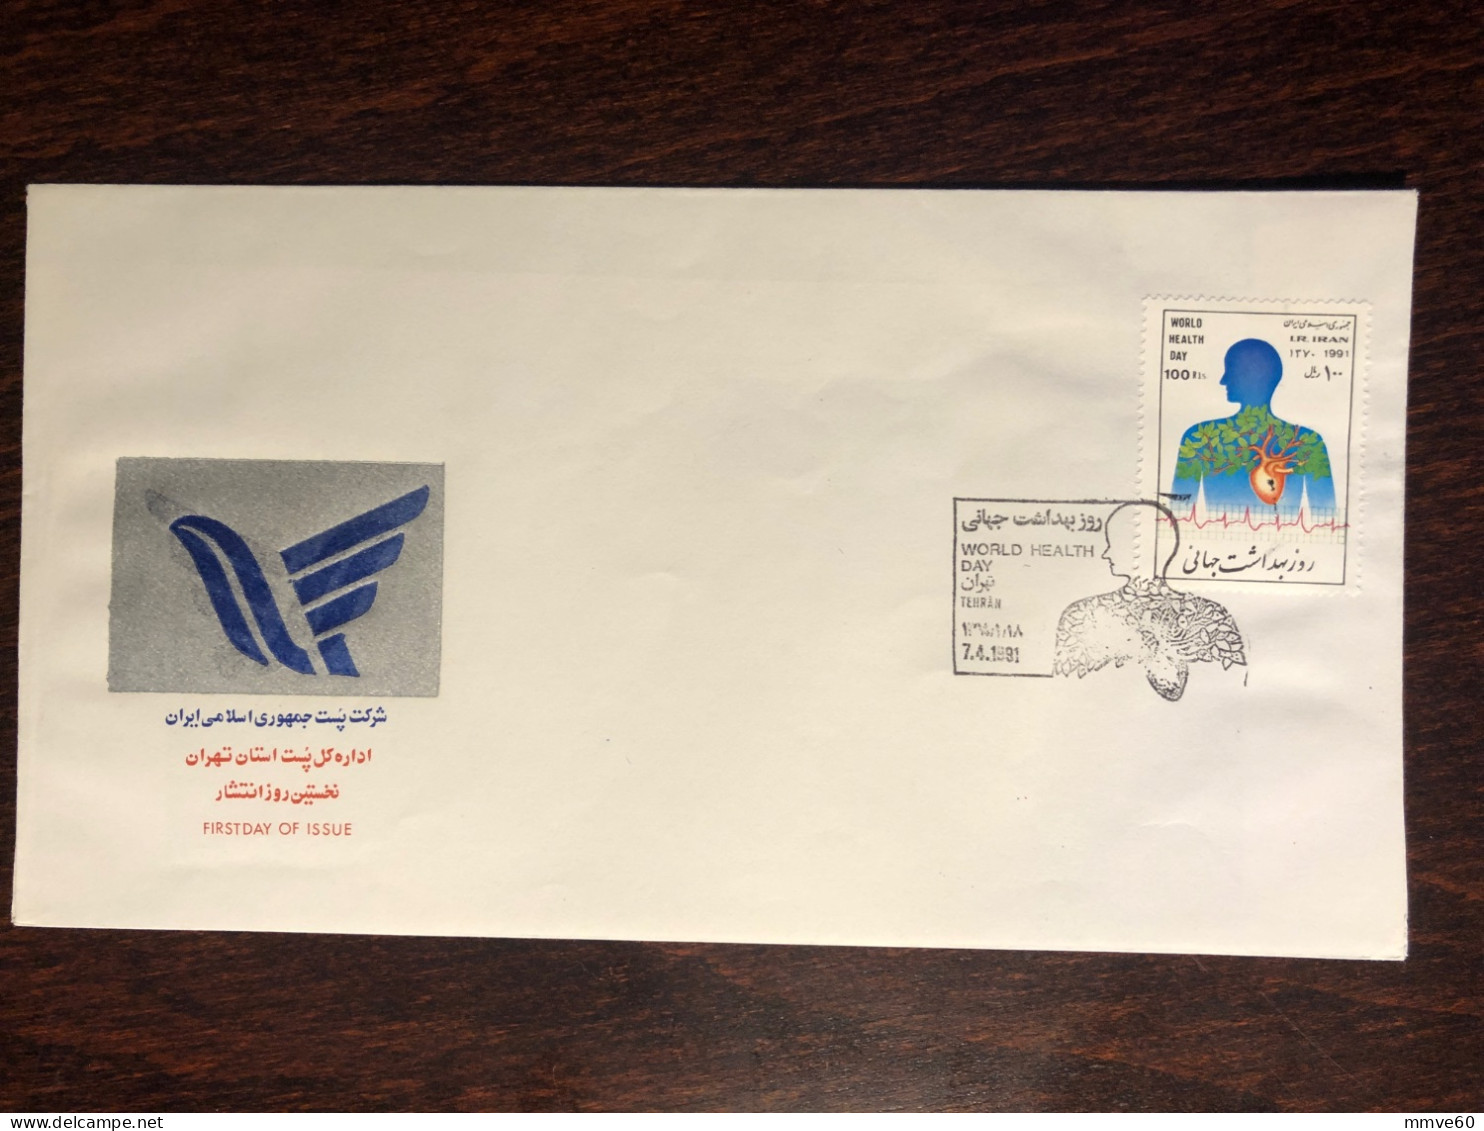 IRAN FDC COVER 1991 YEAR WHD WHO HEART  HEALTH MEDICINE STAMPS - Iran